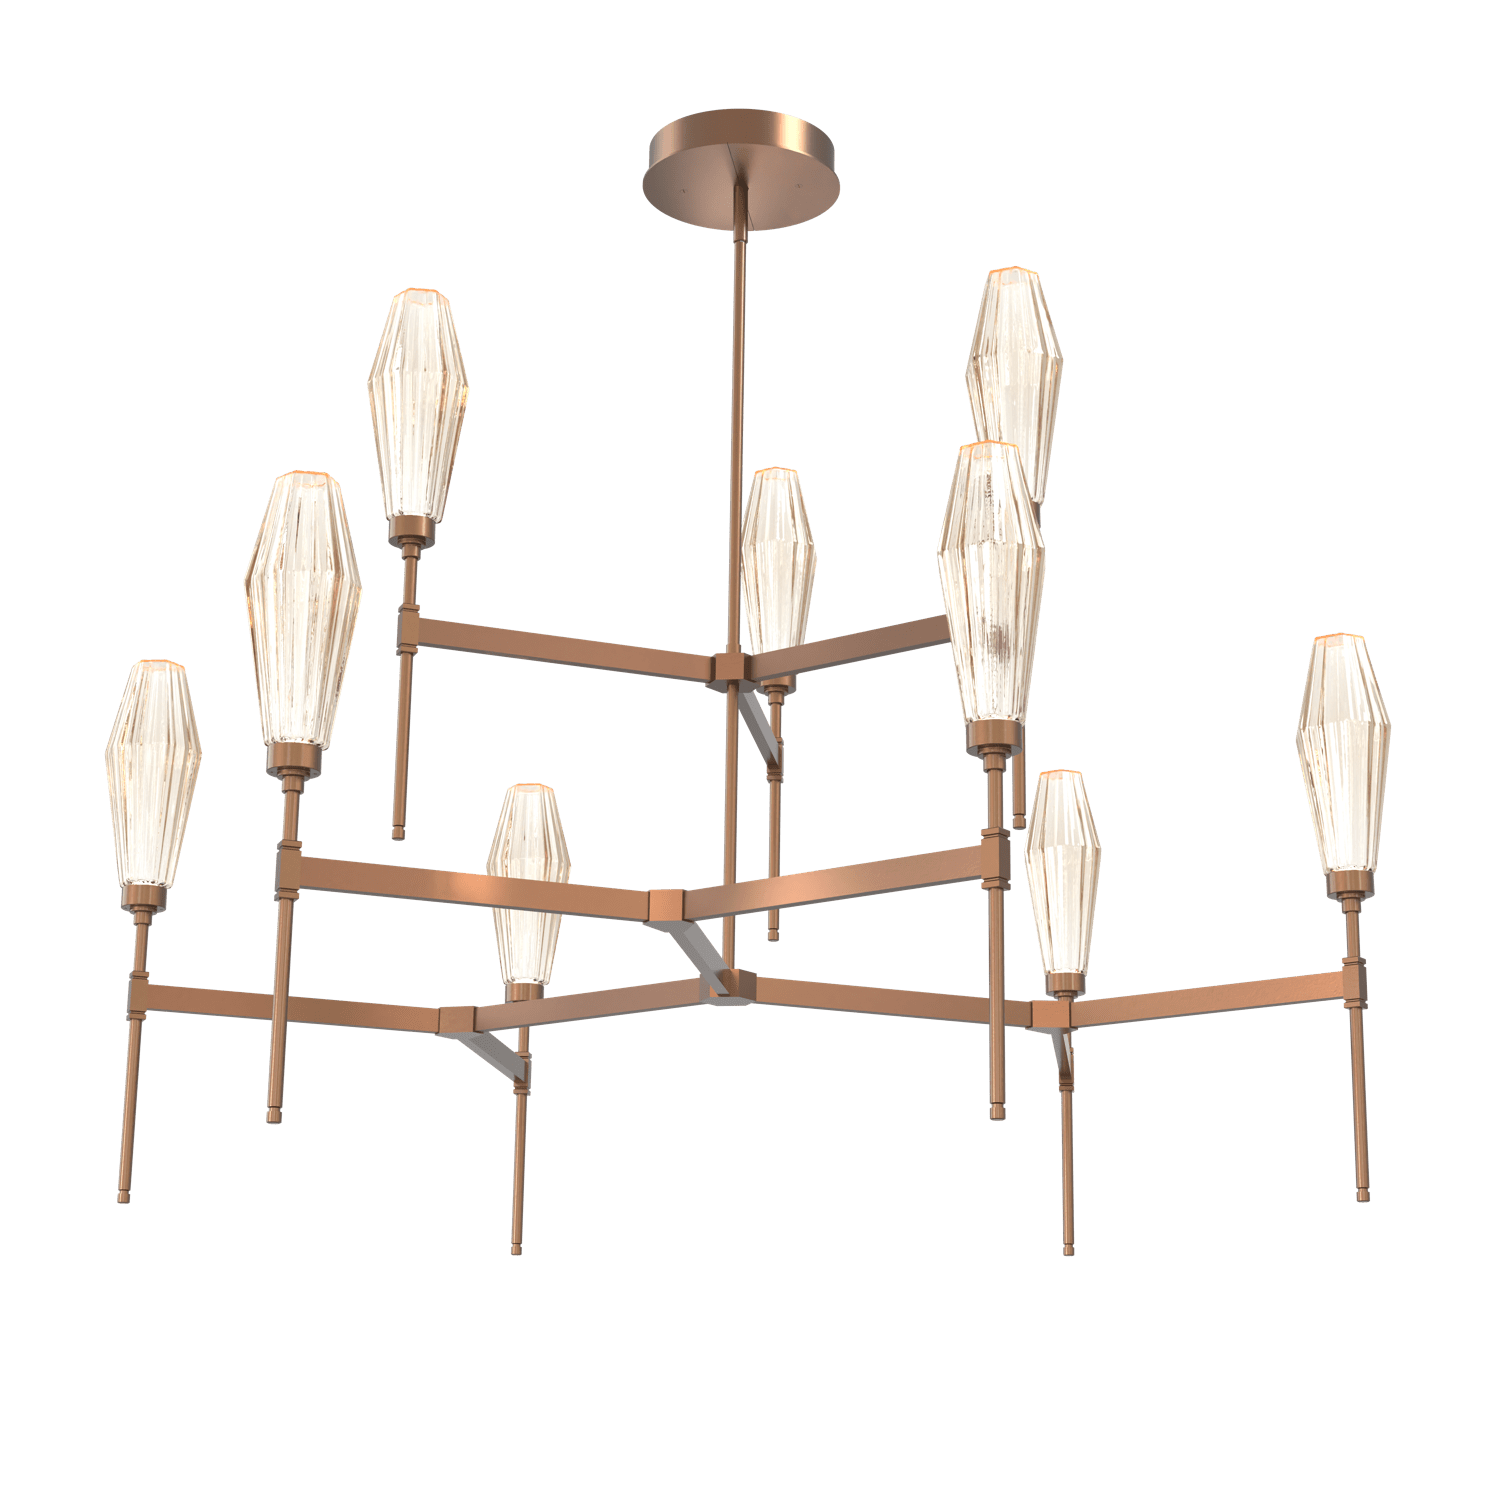 CHB0049-54-BB-RA-Hammerton-Studio-Aalto-54-inch-round-two-tier-belvedere-chandelier-with-burnished-bronze-finish-and-optic-ribbed-amber-glass-shades-and-LED-lamping